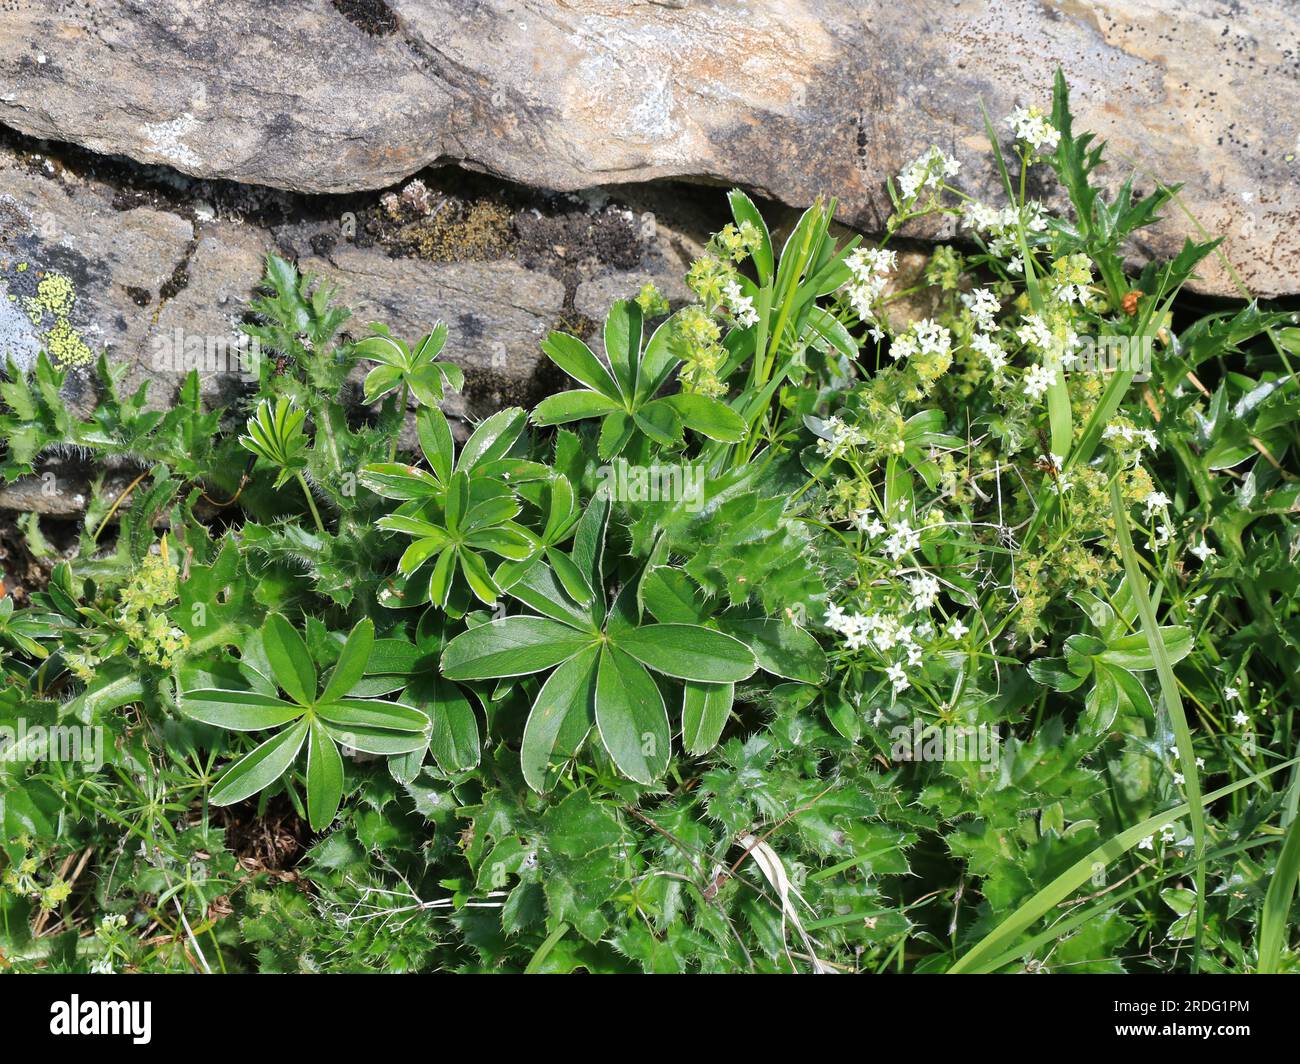 Alchemilla Alpina, medical herb growing in the Alps. Stock Photo